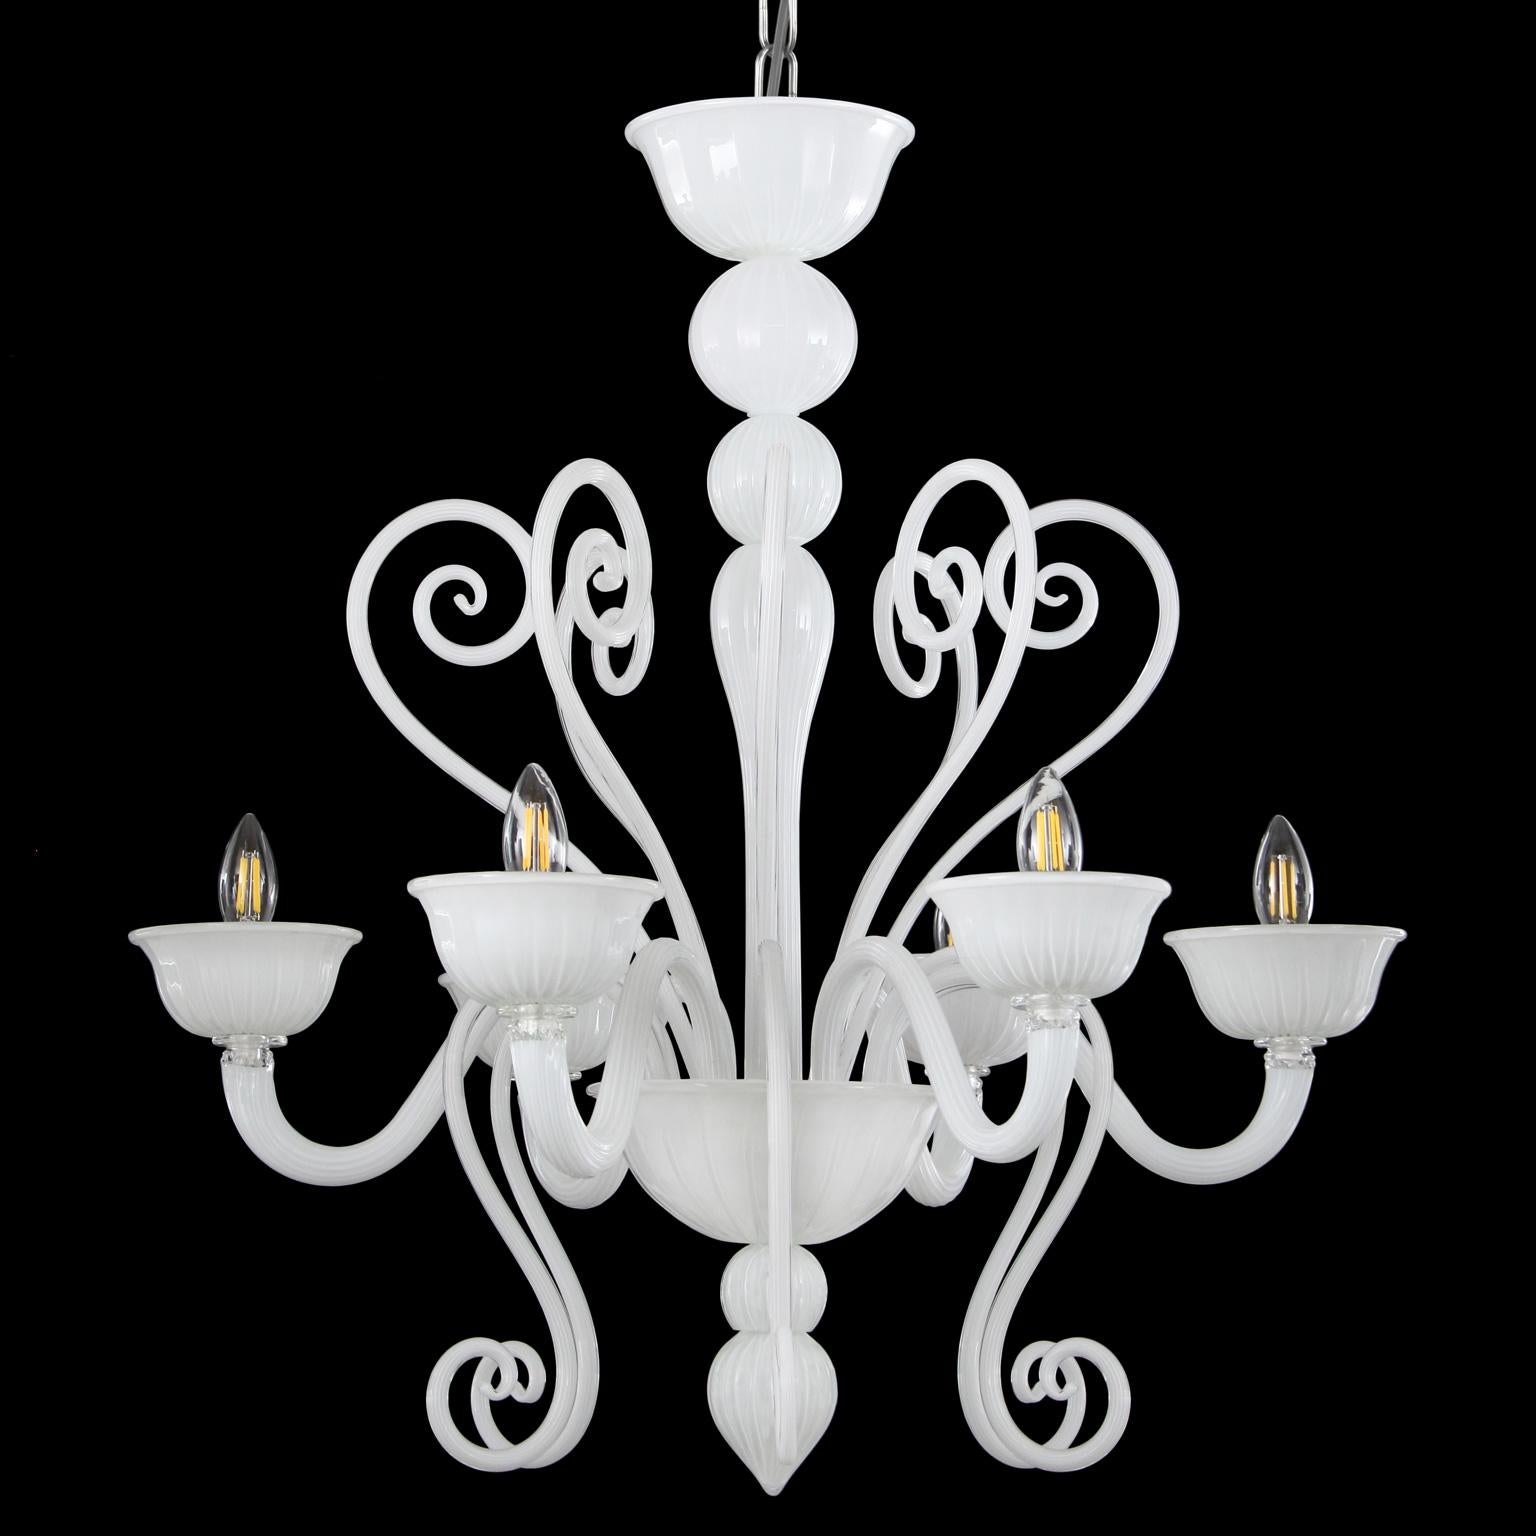 Gatsby chandelier 6 lights. White Murano glass. 'Reversed' decorative curl elements. White glass cups

The Venetian chandelier Gatsby is the perfect combination of elegant and modern elements. The use of color featuring bright tones, the surface